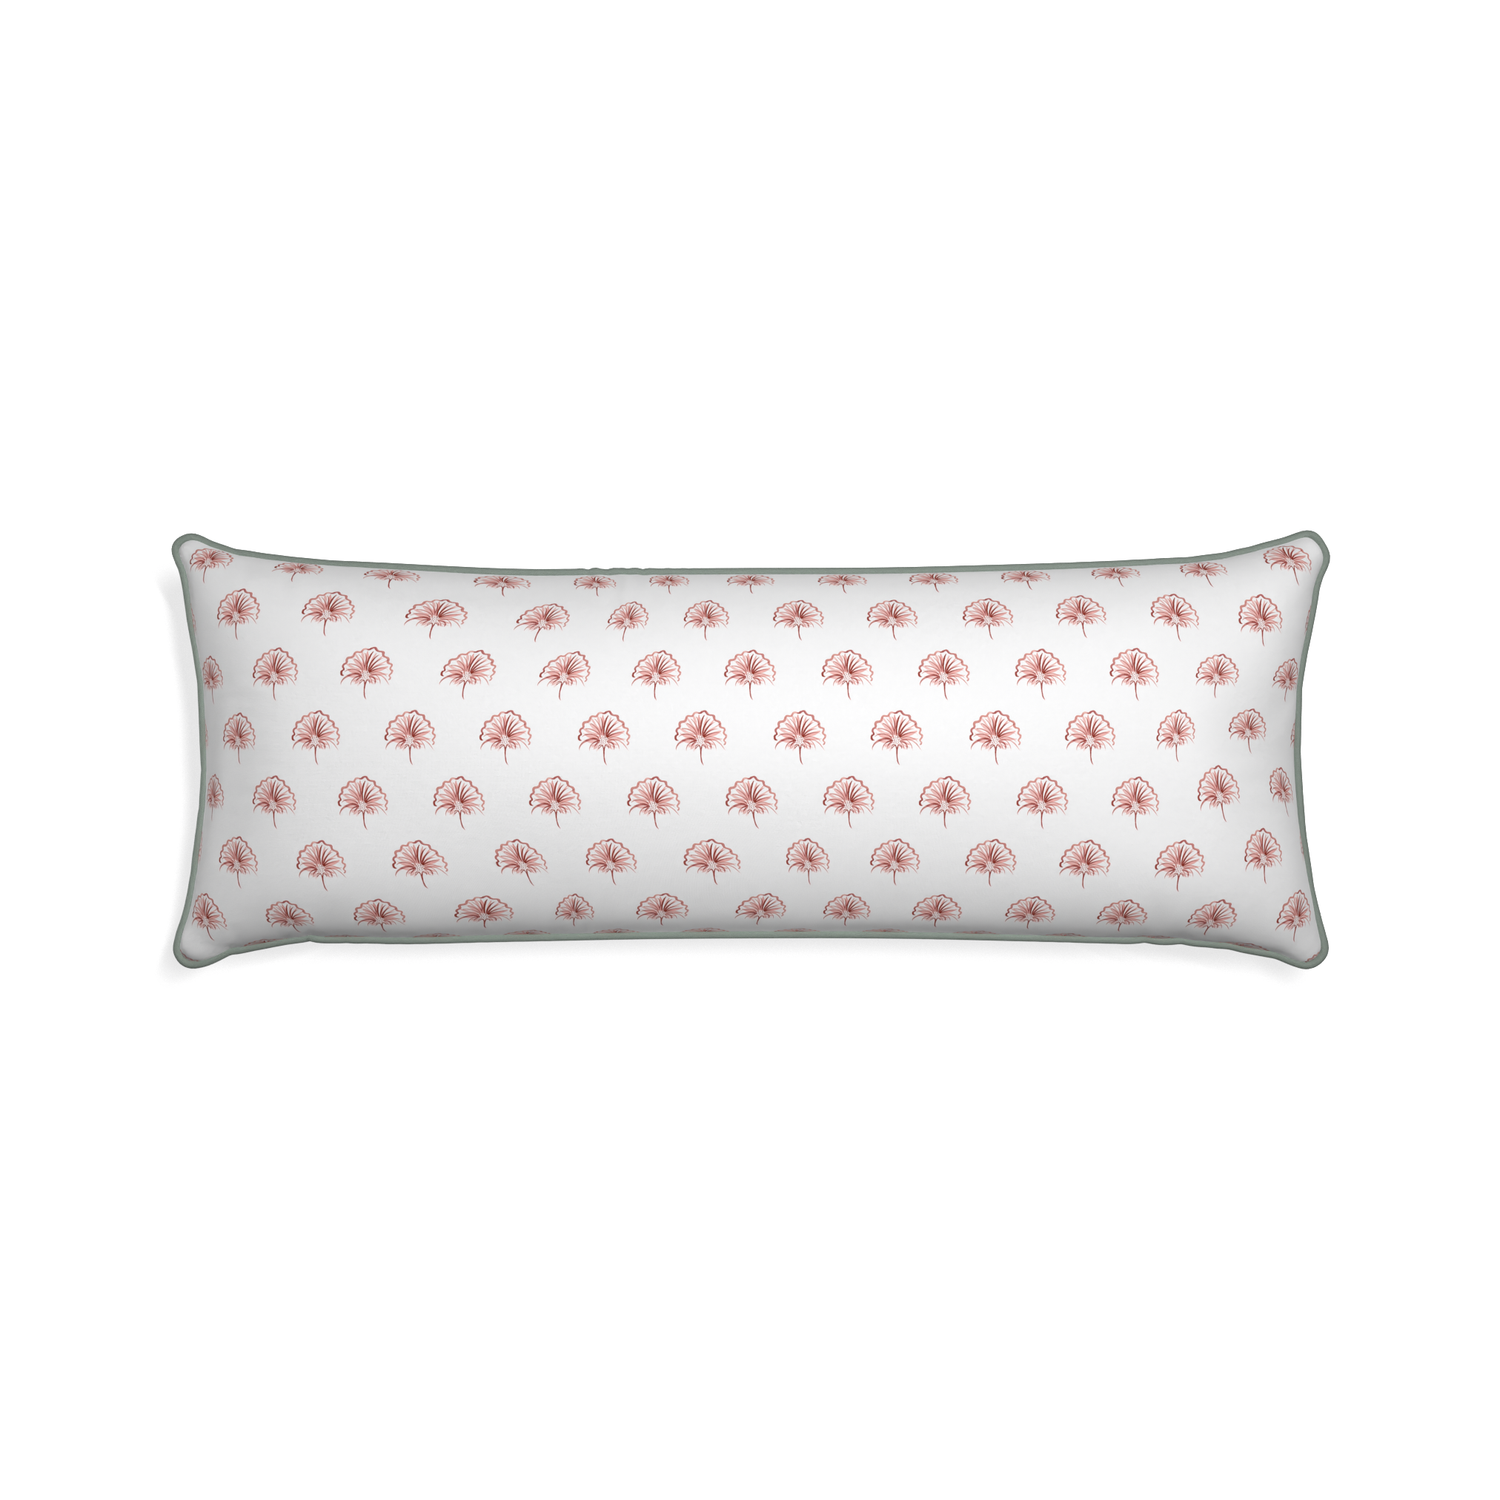 Xl-lumbar penelope rose custom floral pinkpillow with sage piping on white background